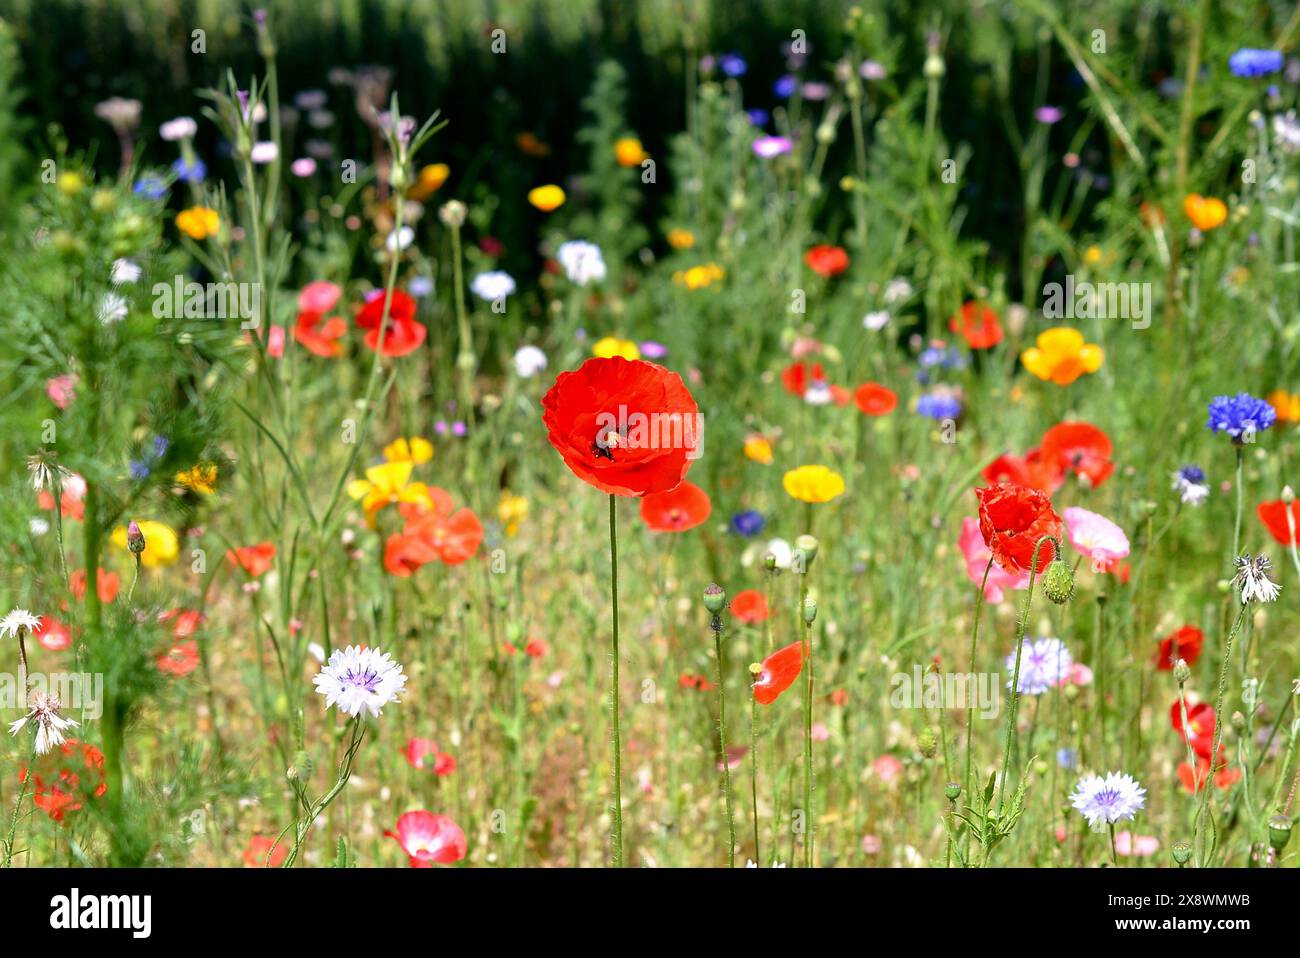 A photograph of a field with many different coloured spring flowers Stock Photo